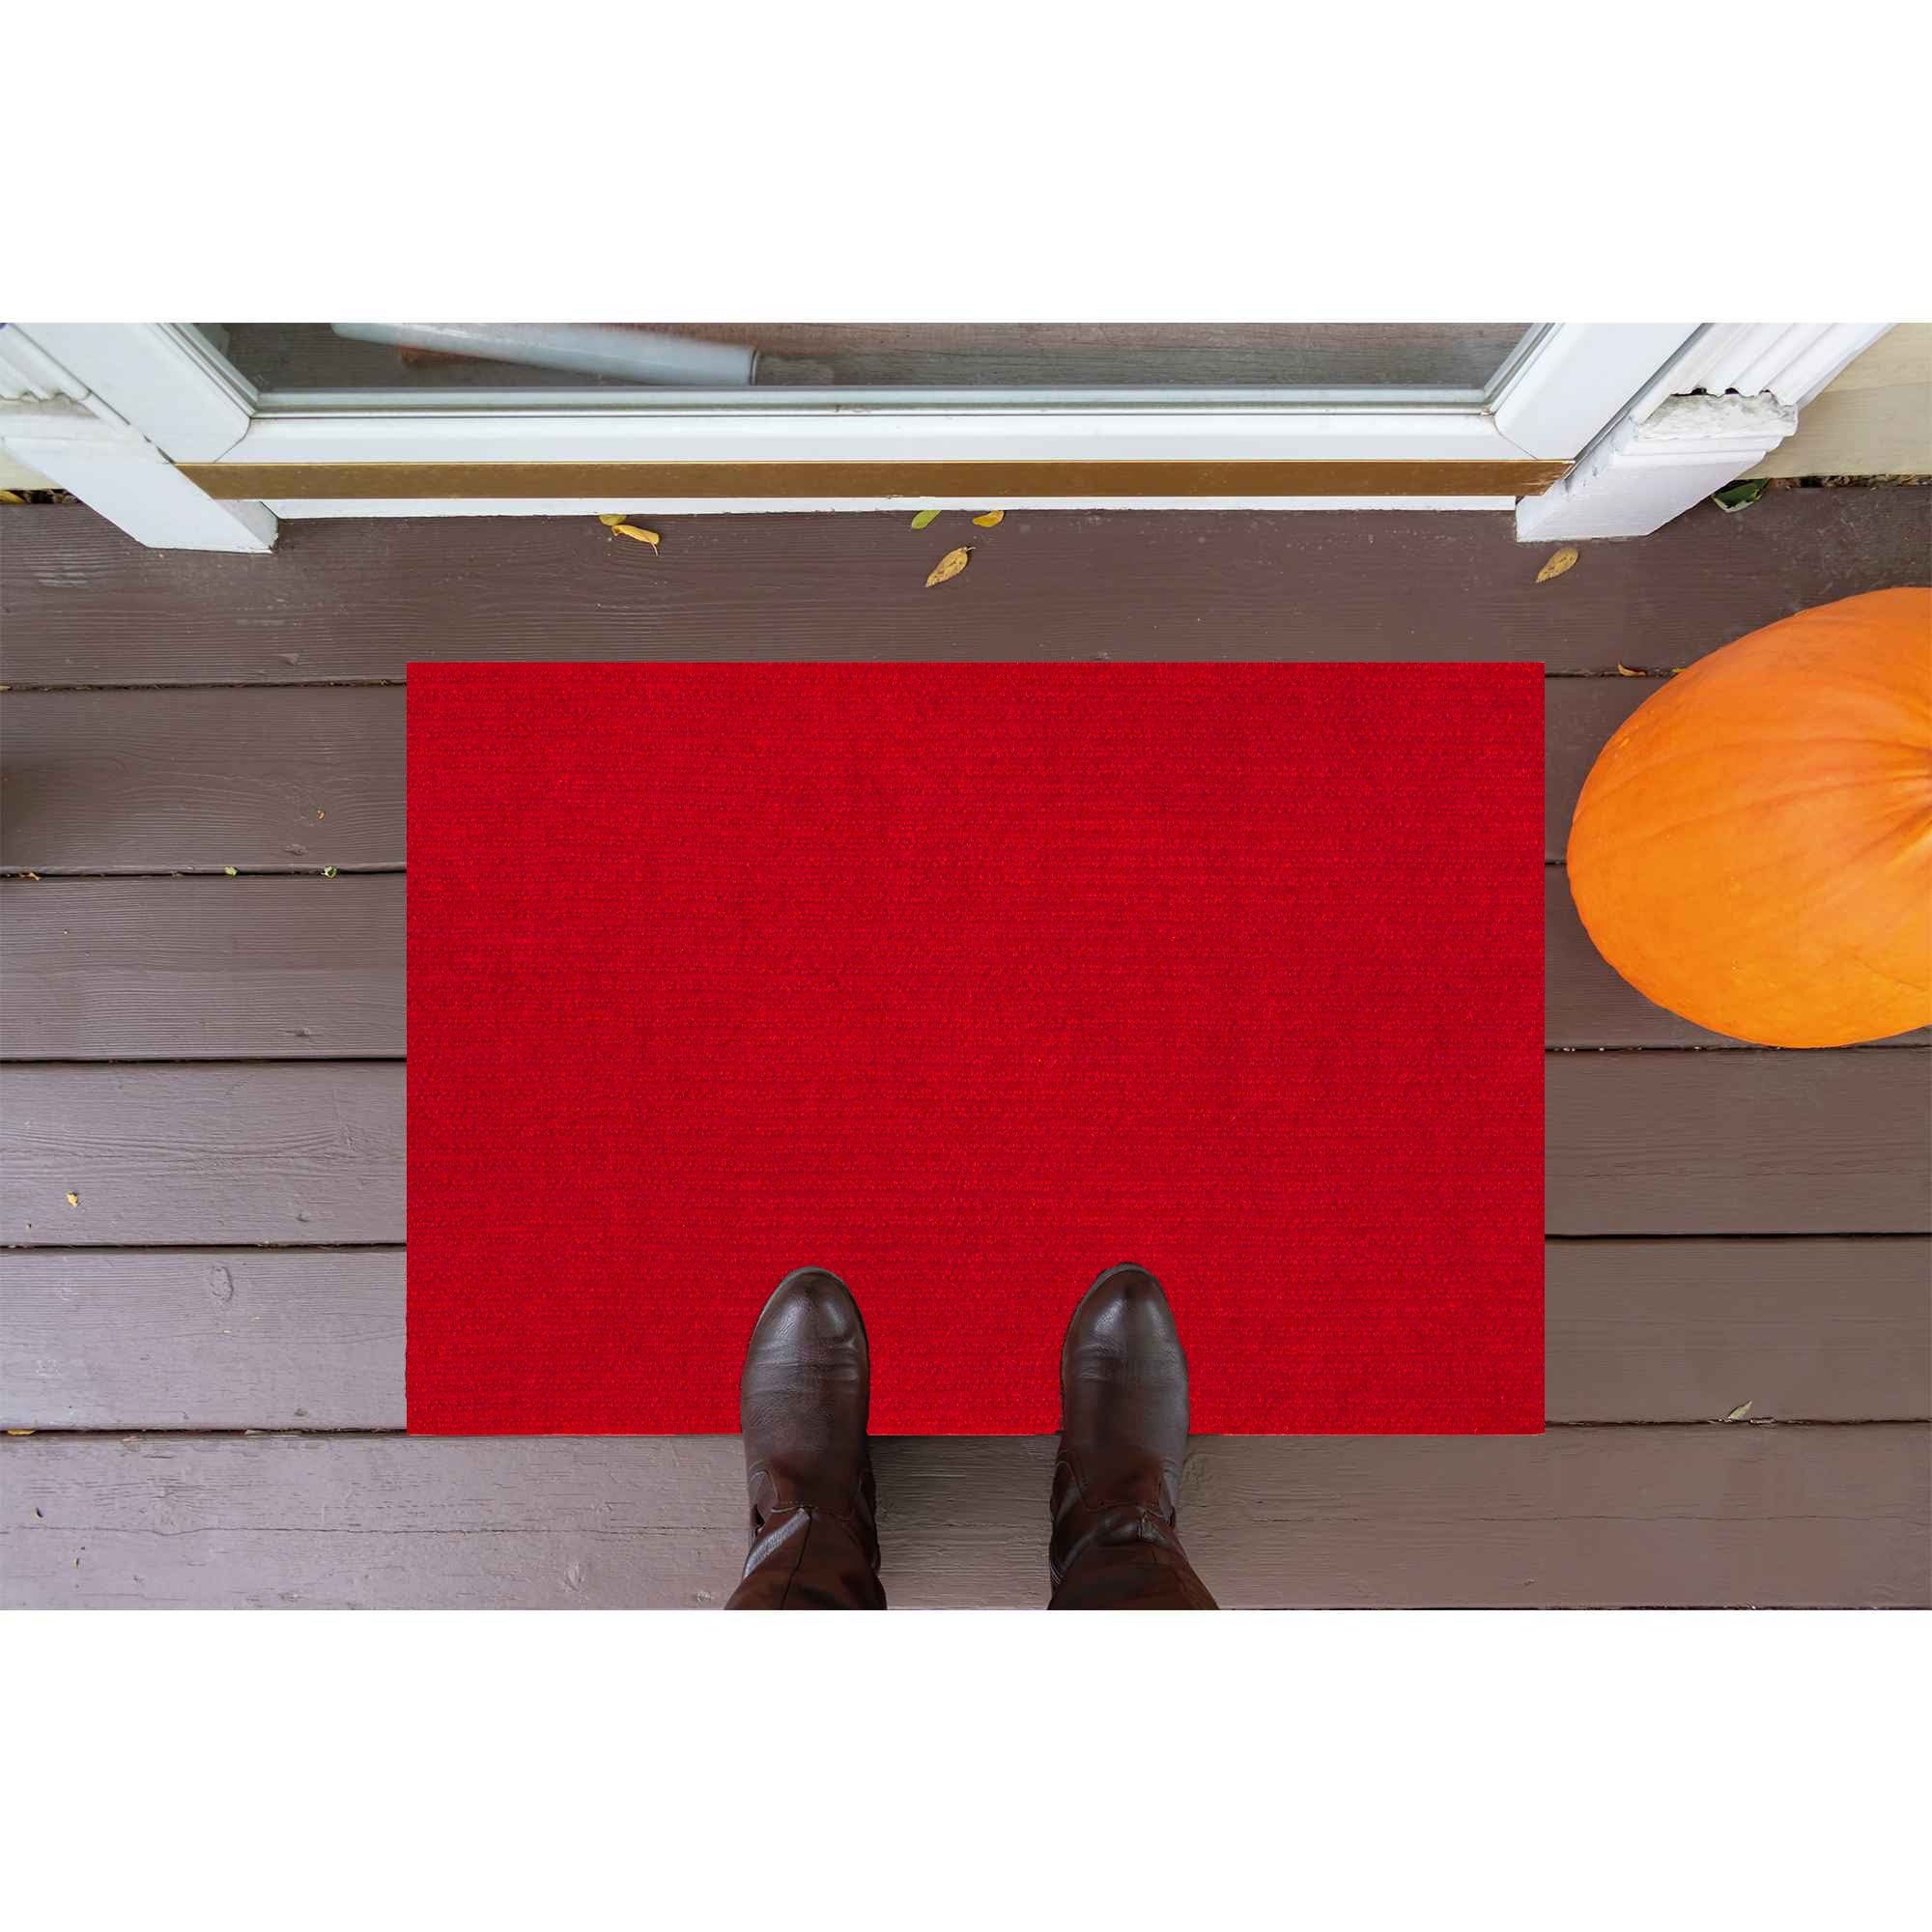 Scrabe Rib Waterproof Non-Slip Rubberback Ribbed Red Indoor/Outdoor Utility Rug Ottomanson Rug Size: Runner 2' x 22